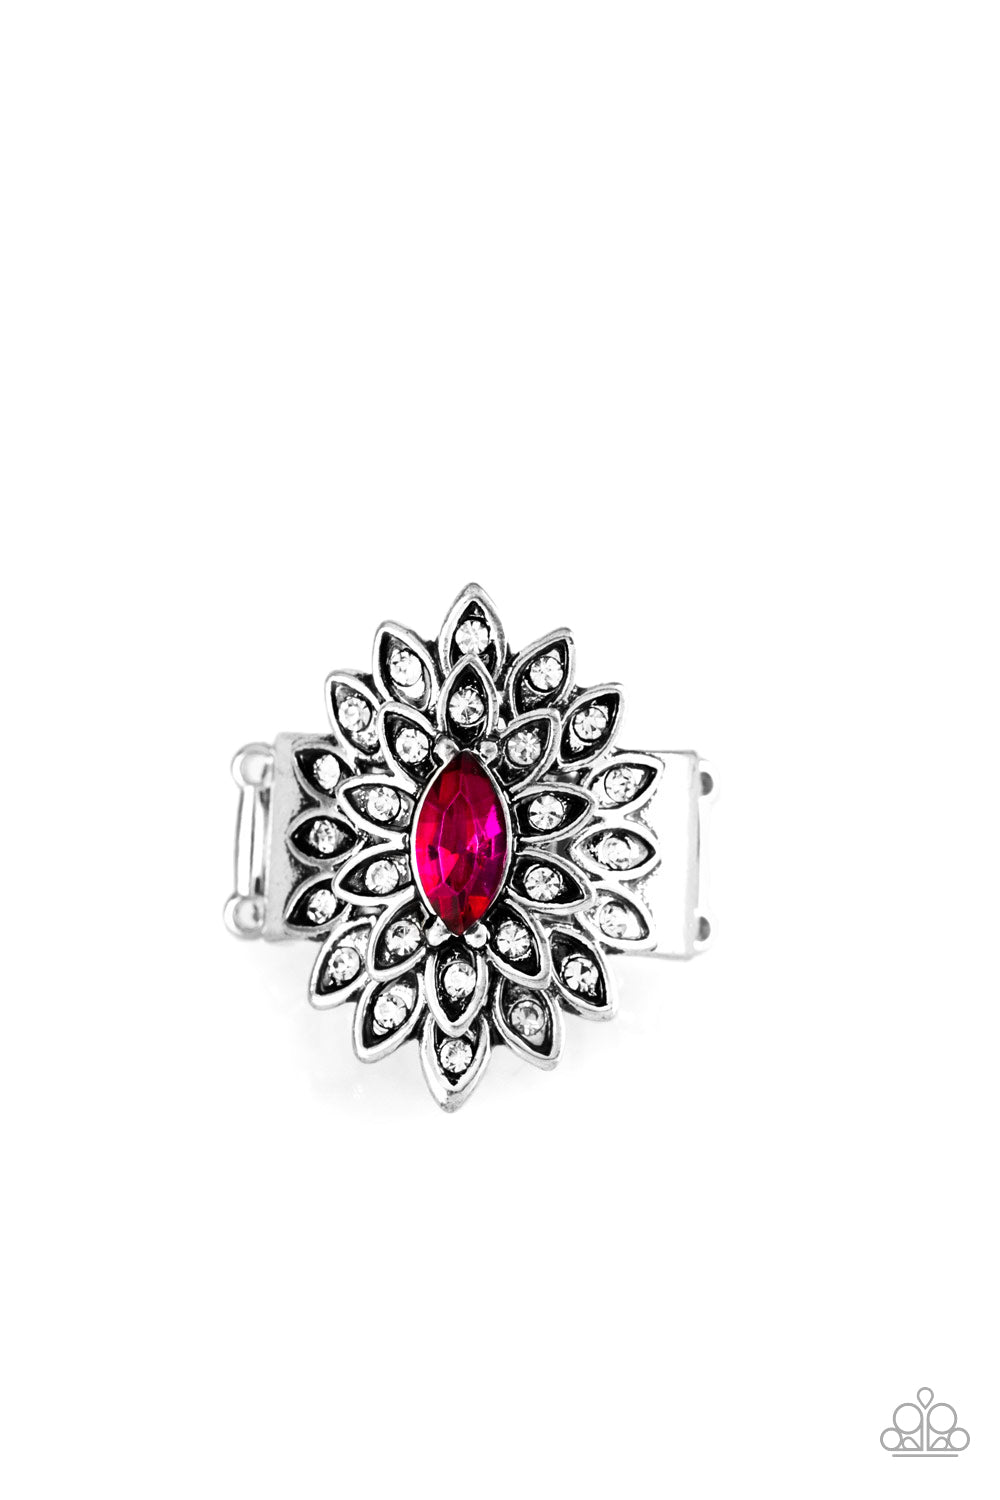 shop-sassy-affordable- blooming-fireworks-pink-paparazzi-accessories